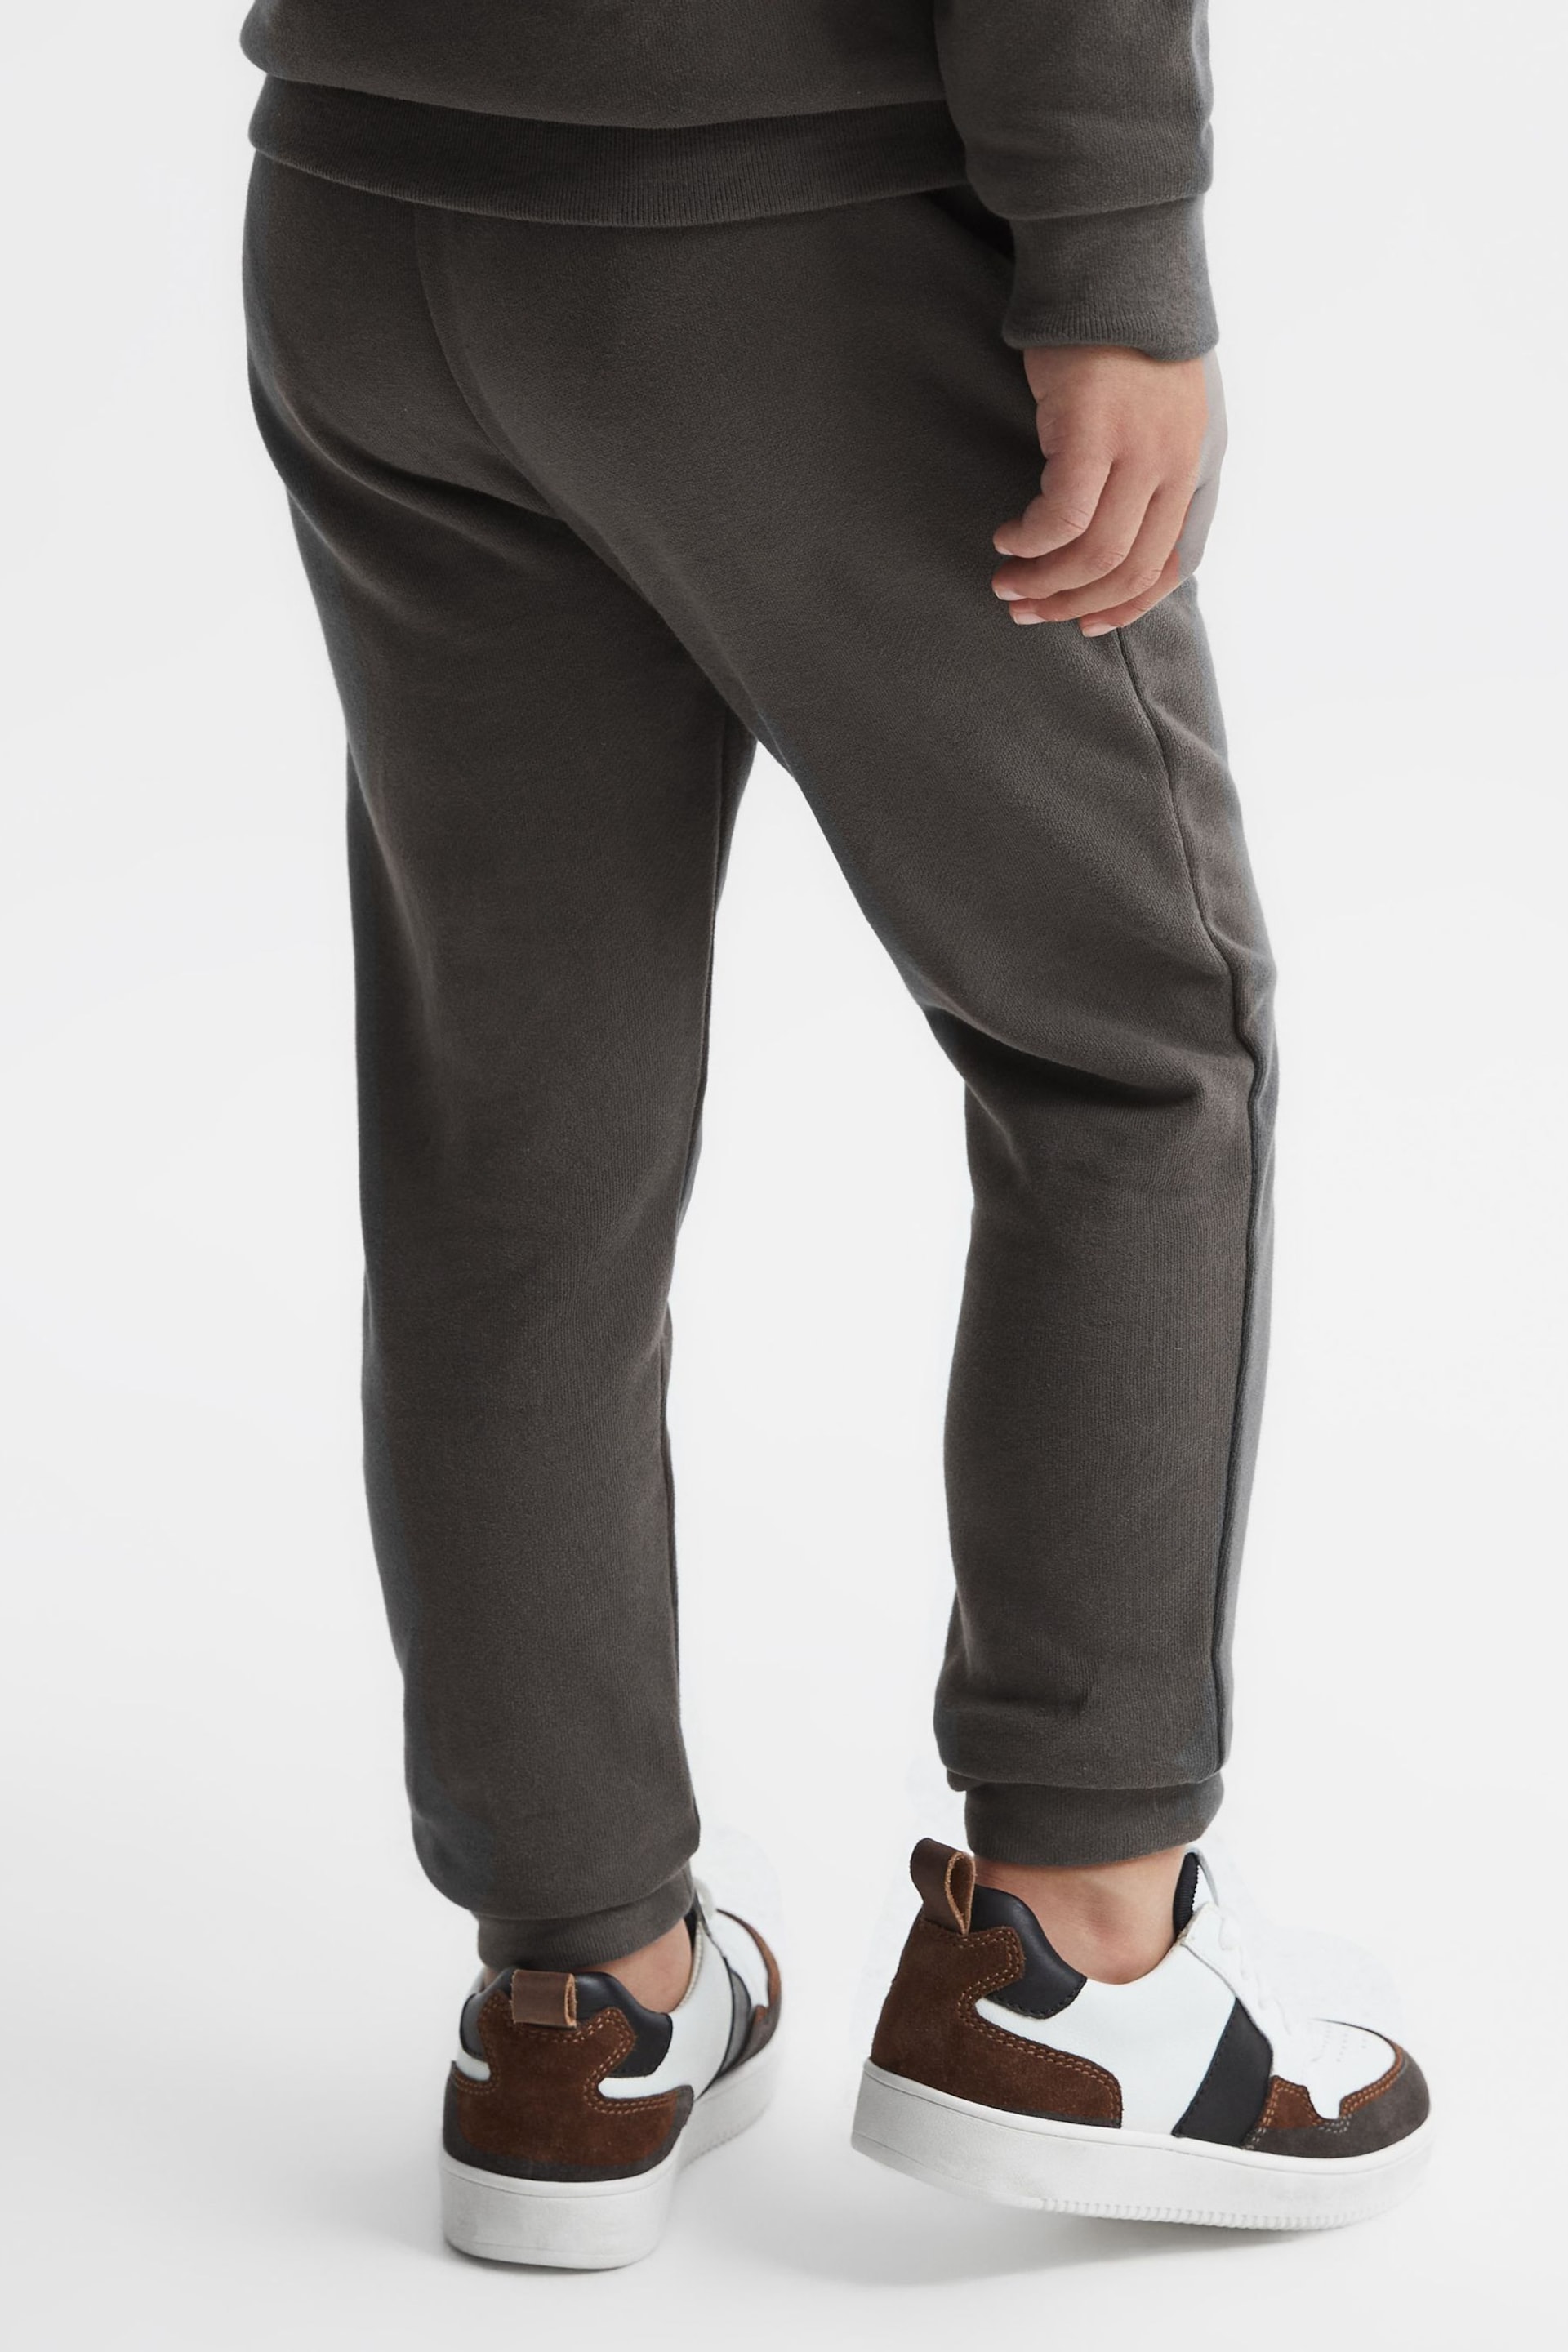 Reiss Olive Toby Garment Dyed Logo Joggers - Image 5 of 6